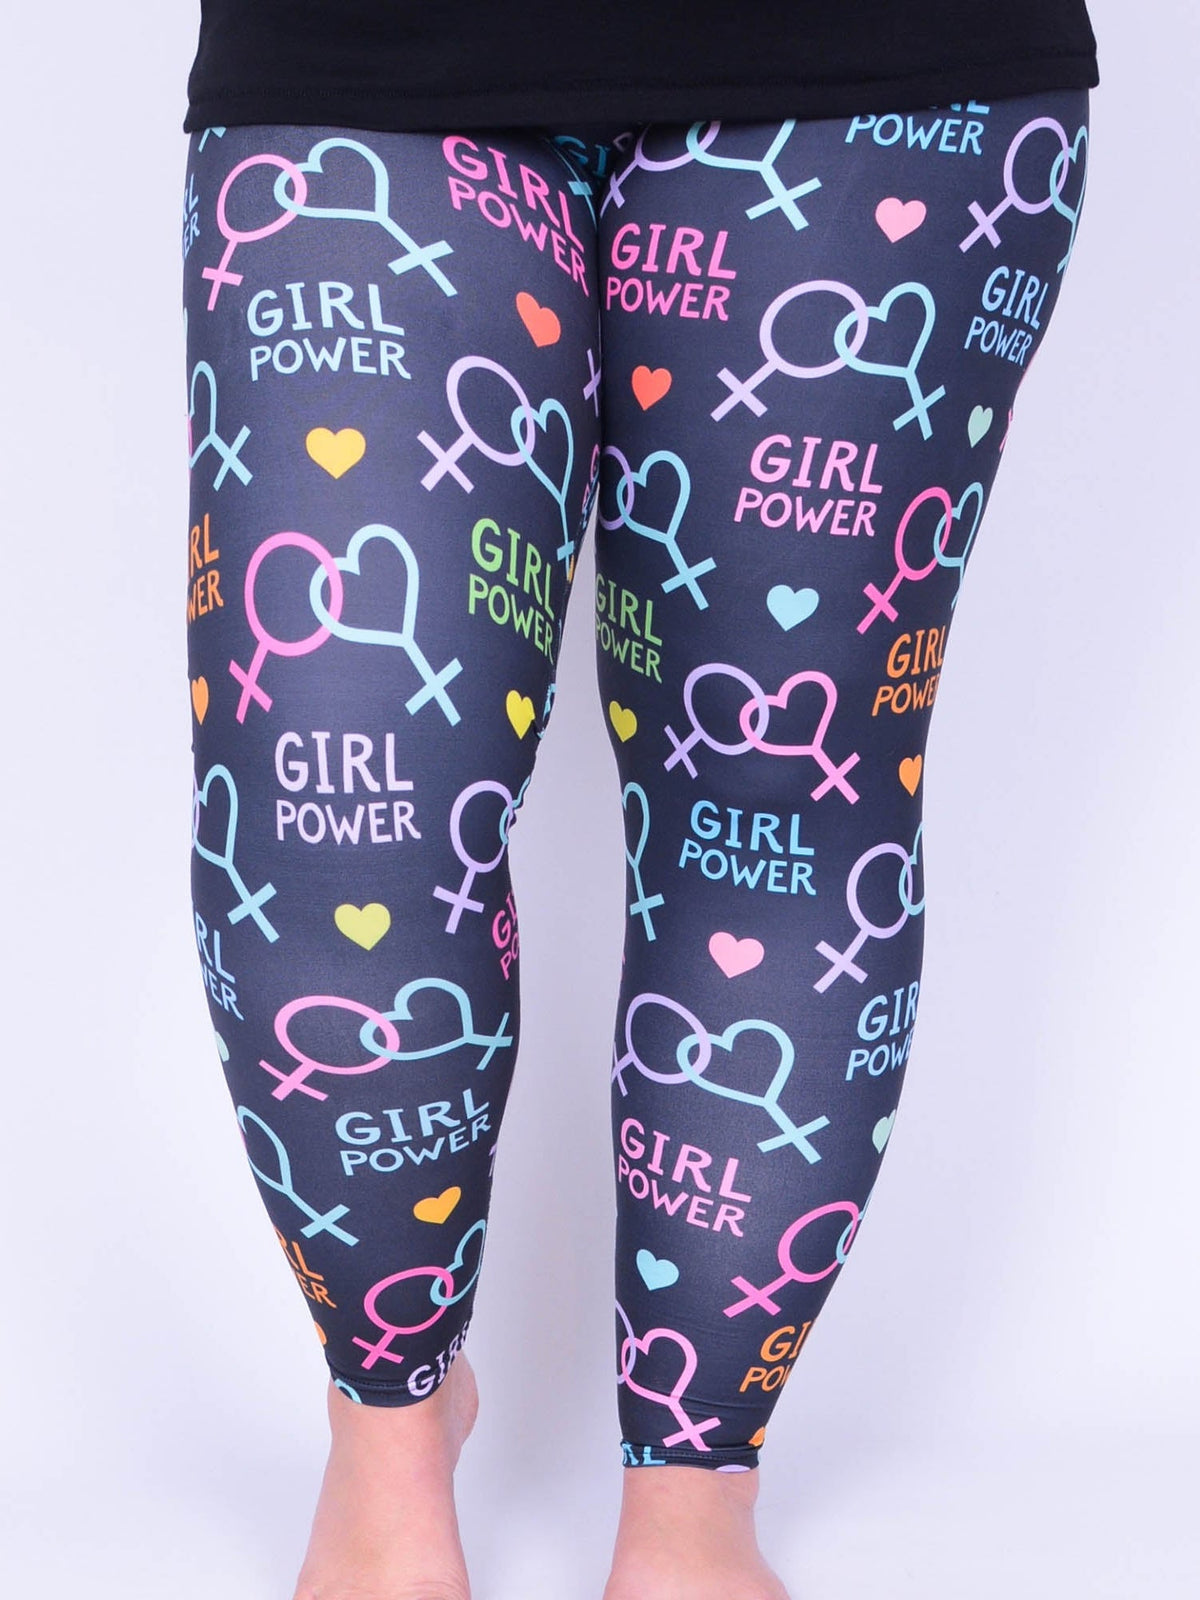 Leggings - Girl Power - L26, Trousers, Pure Plus Clothing, Lagenlook Clothing, Plus Size Fashion, Over 50 Fashion